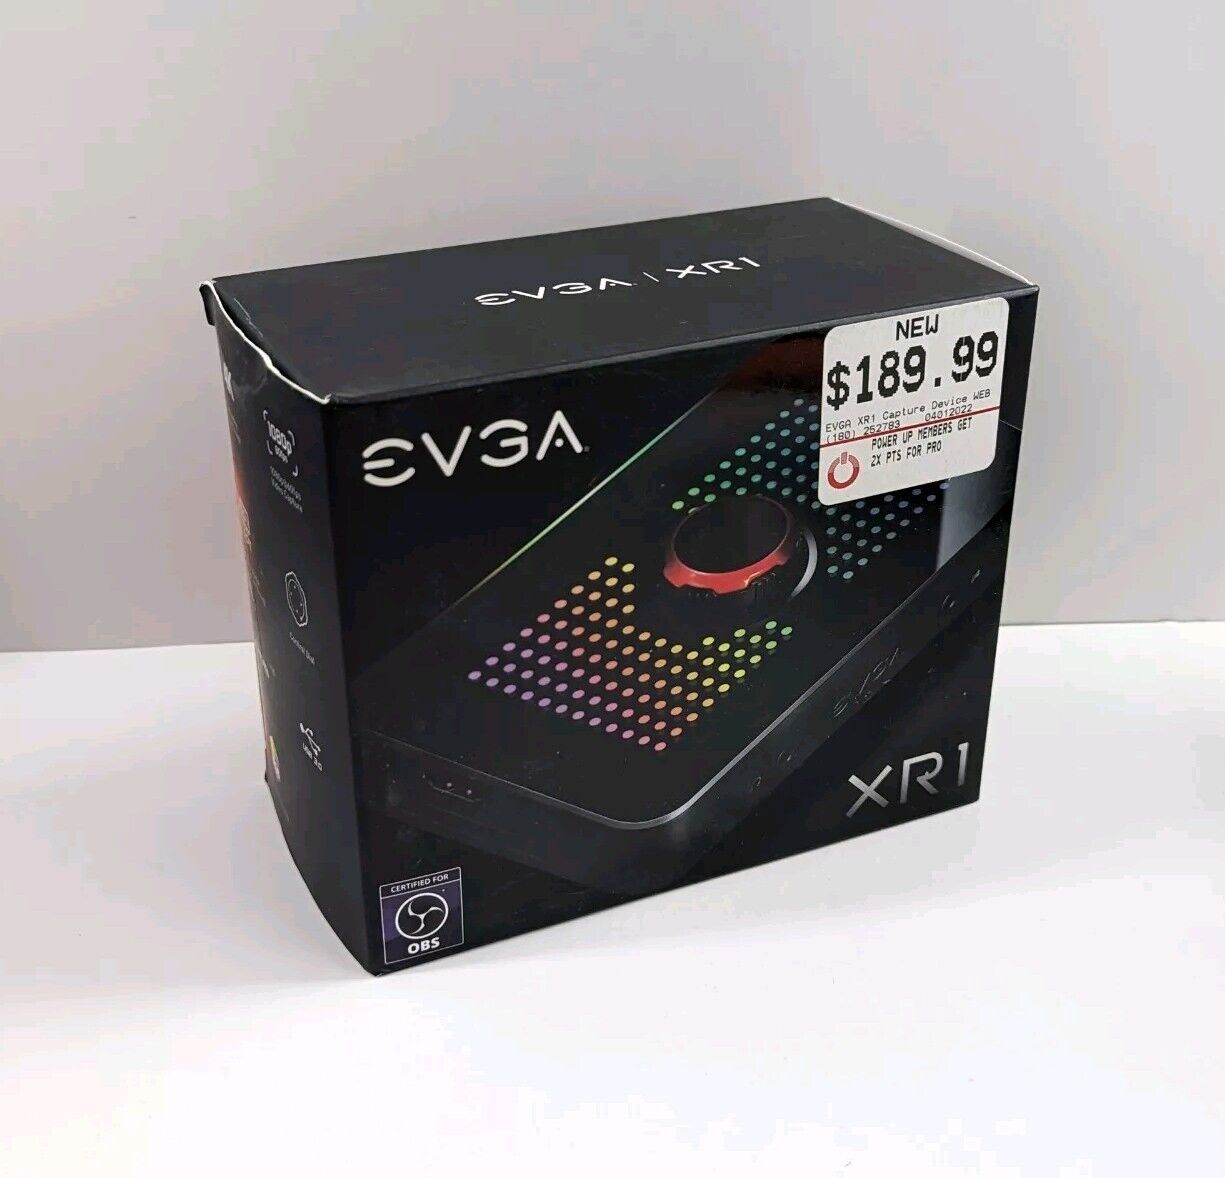 EVGA XR1 141-U1-CB10-LR Video Capture Device - New in Box - Computer Gaming